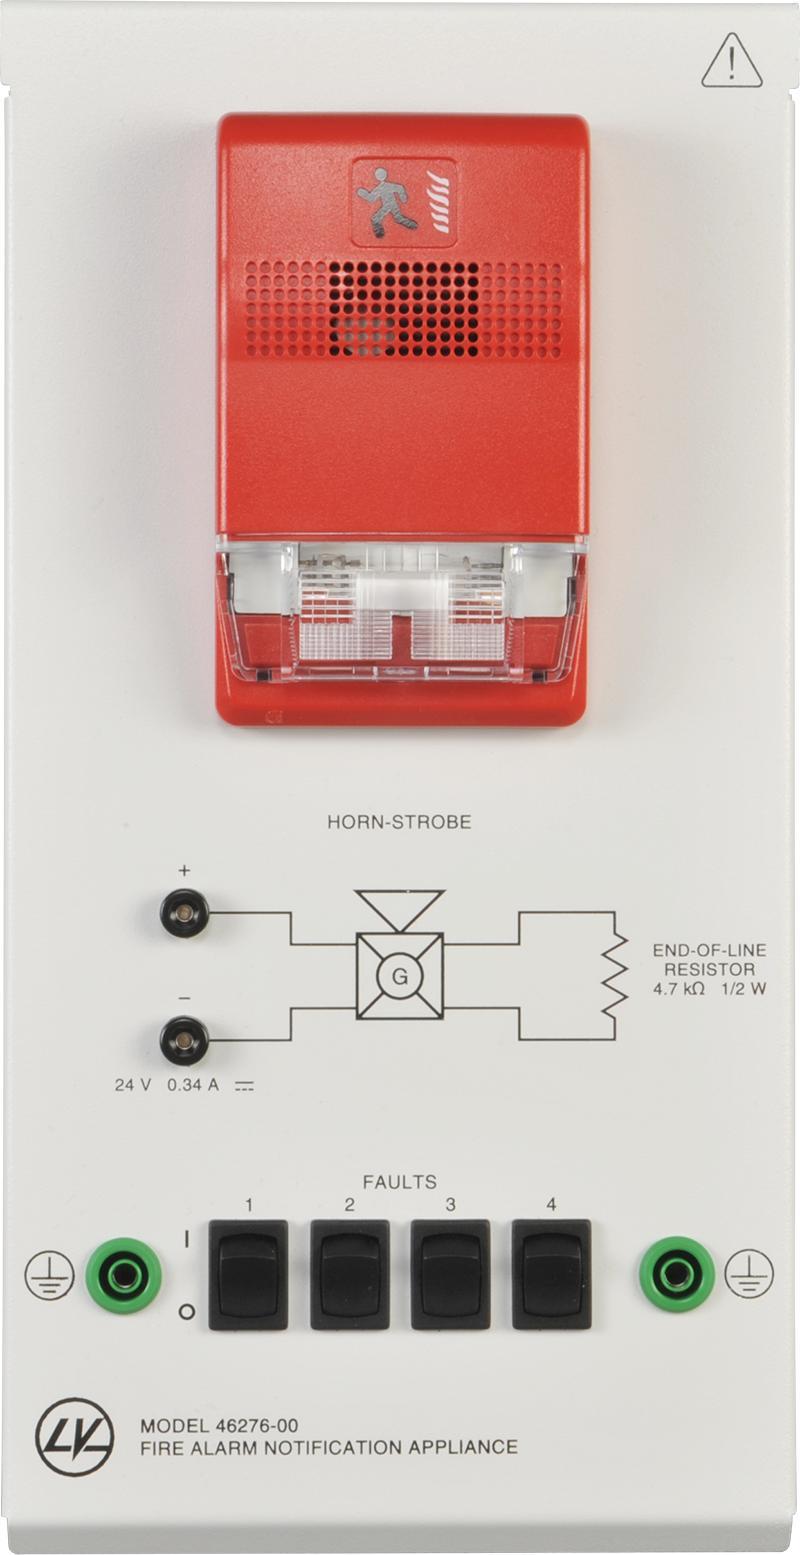 Fire Alarm Notification Appliance 588287 (46276-00) The Fire Alarm Notification Appliance module consists of a horn-strobe station and an end-ofline resistor.